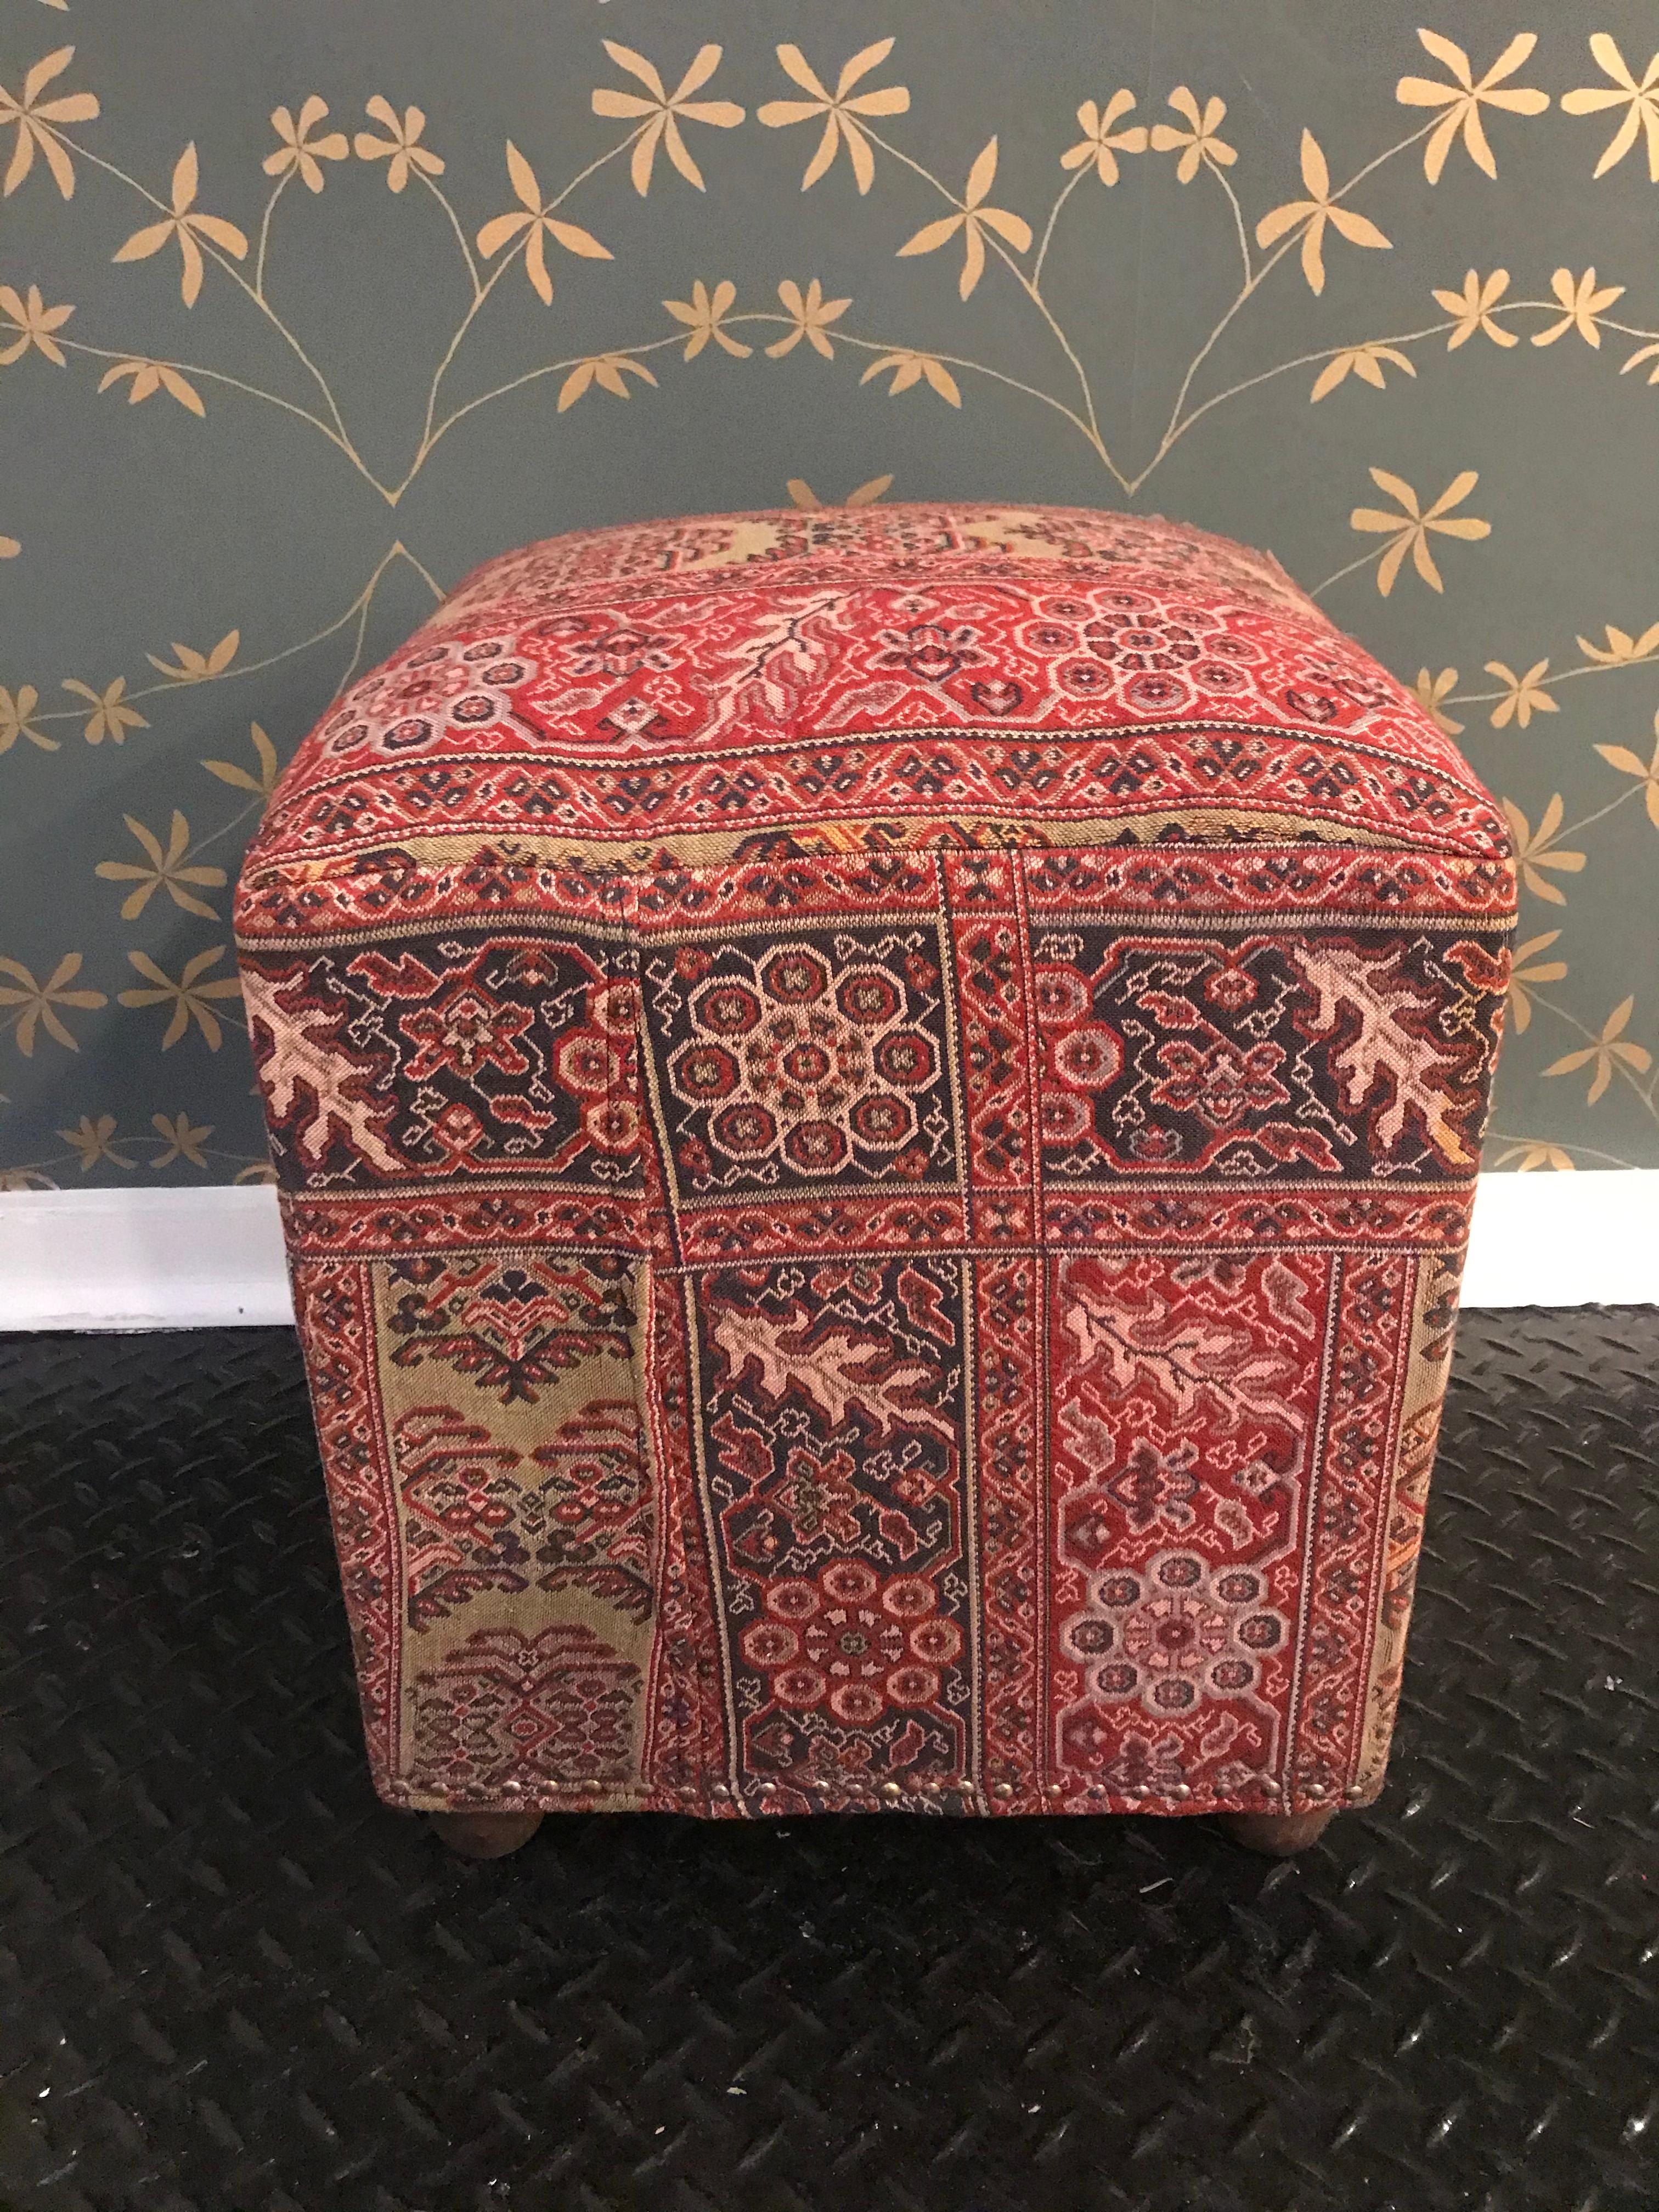 A cushioned ottoman with beautiful vintage fabric.
Decorative stapling on the bottom edge and rounded wooden legs.